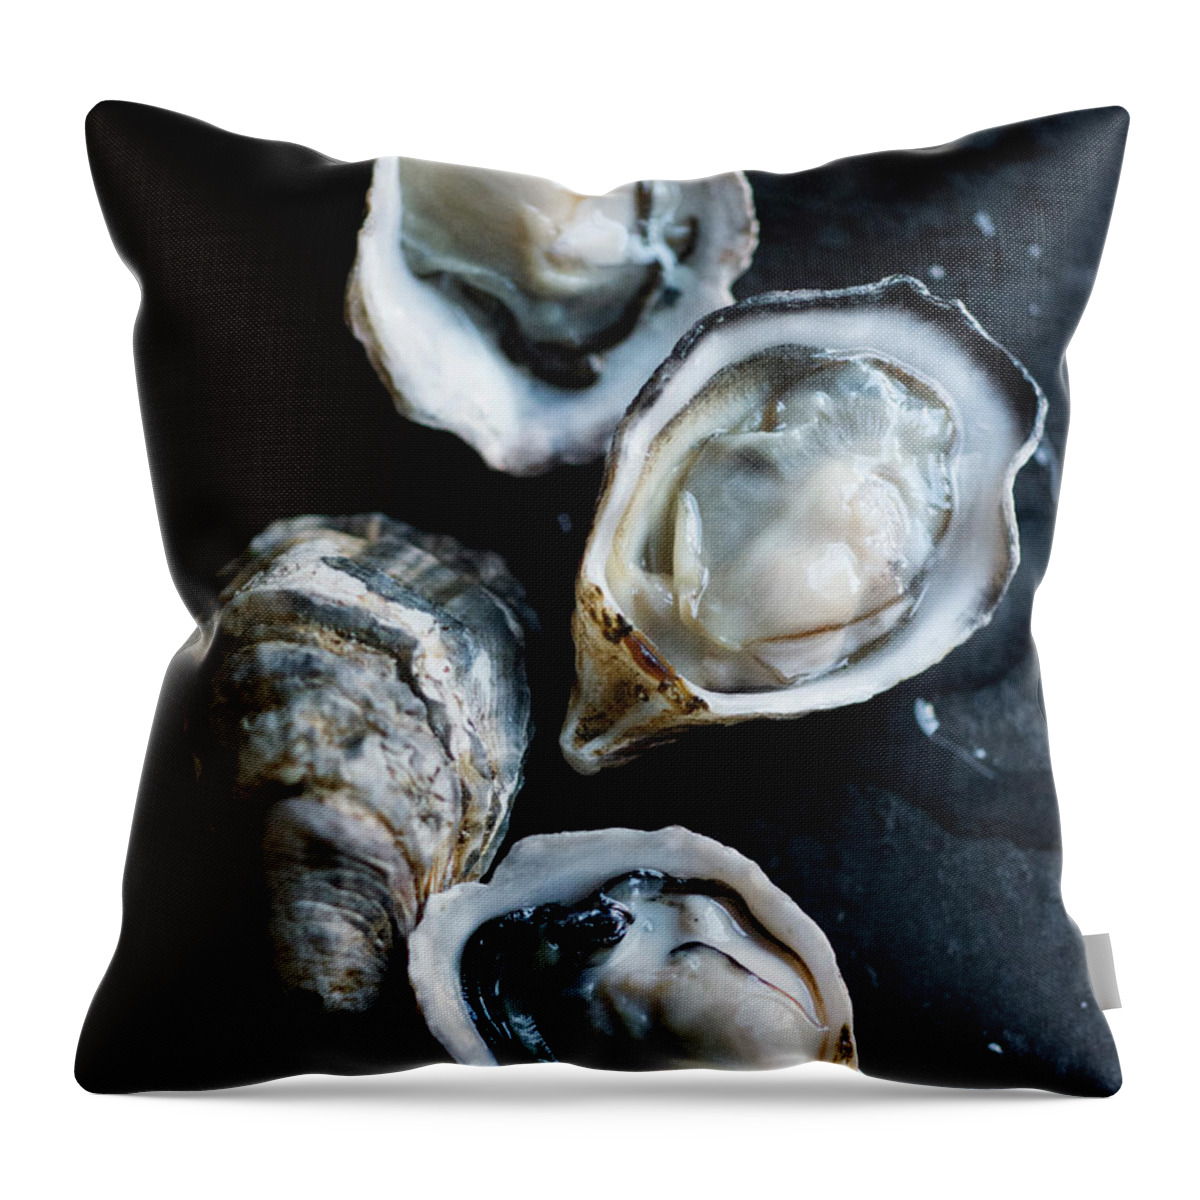 Oyster Throw Pillow featuring the photograph Raw Oysters by Jack Andersen